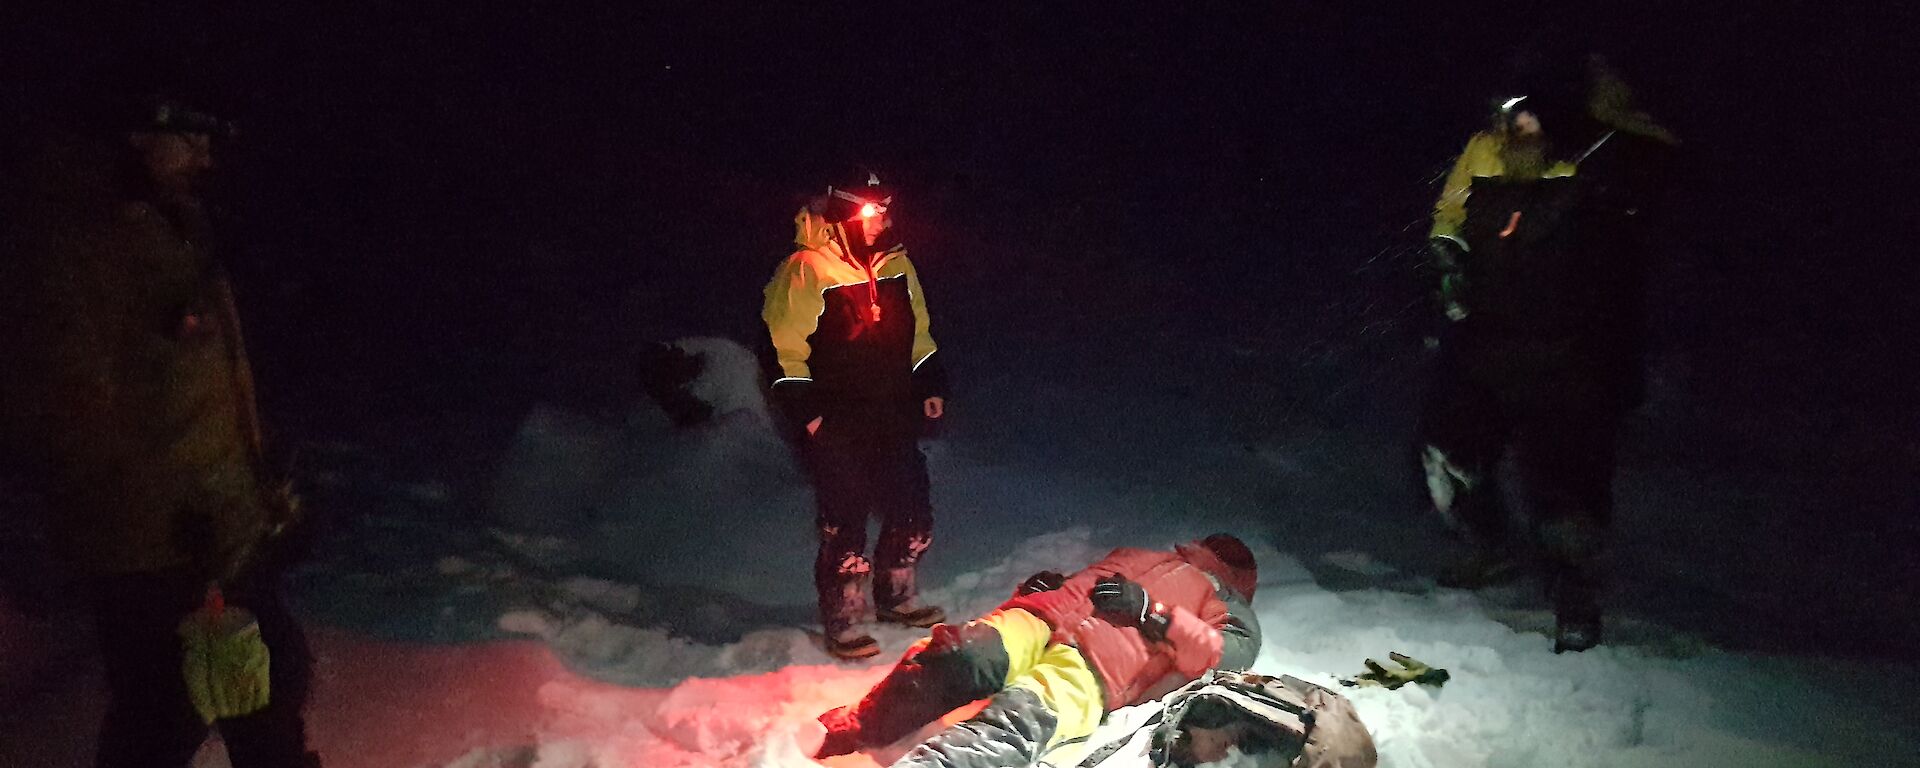 Jason the “casualty” lies on the snow covered ground in the dark surrounded by rescuers